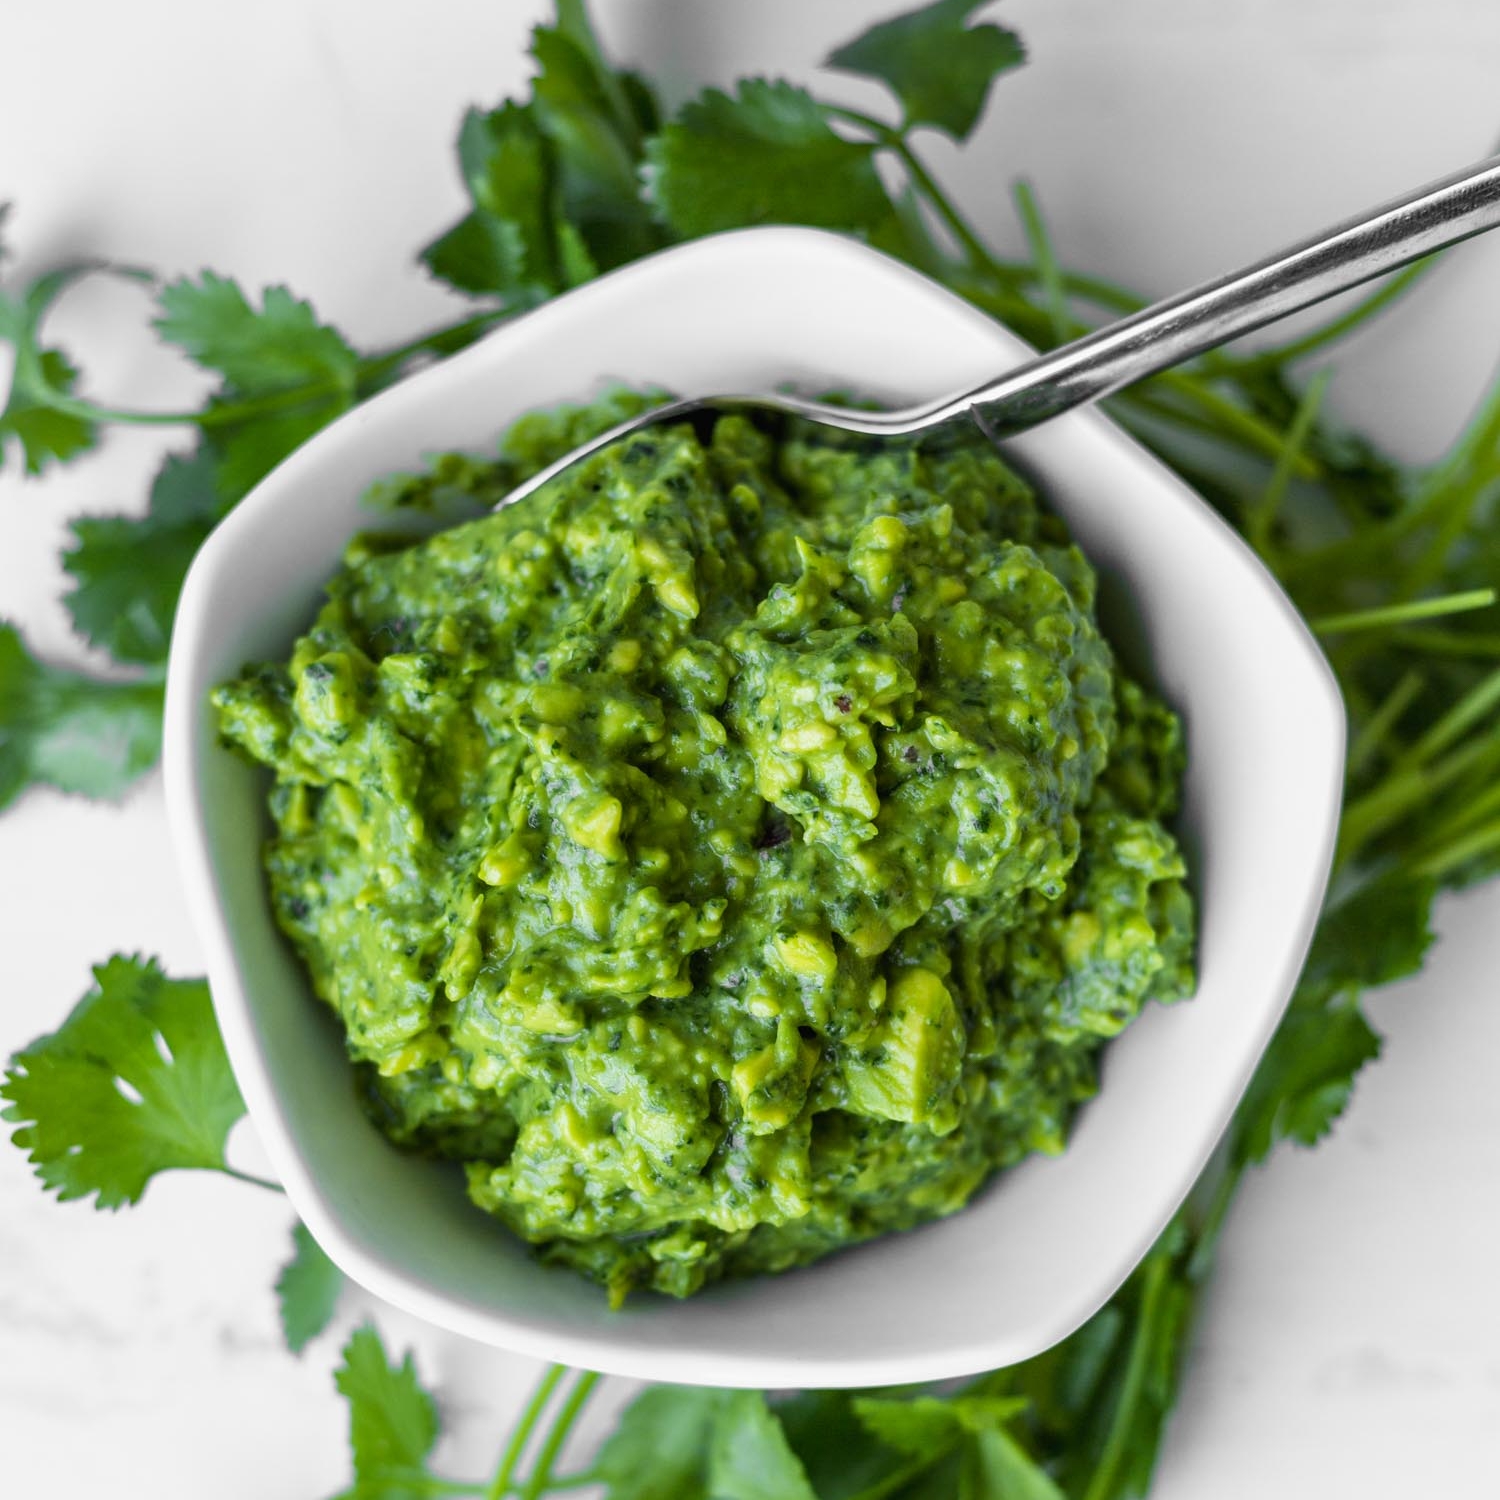 extra-green-guacamole-with-spinach.jpg